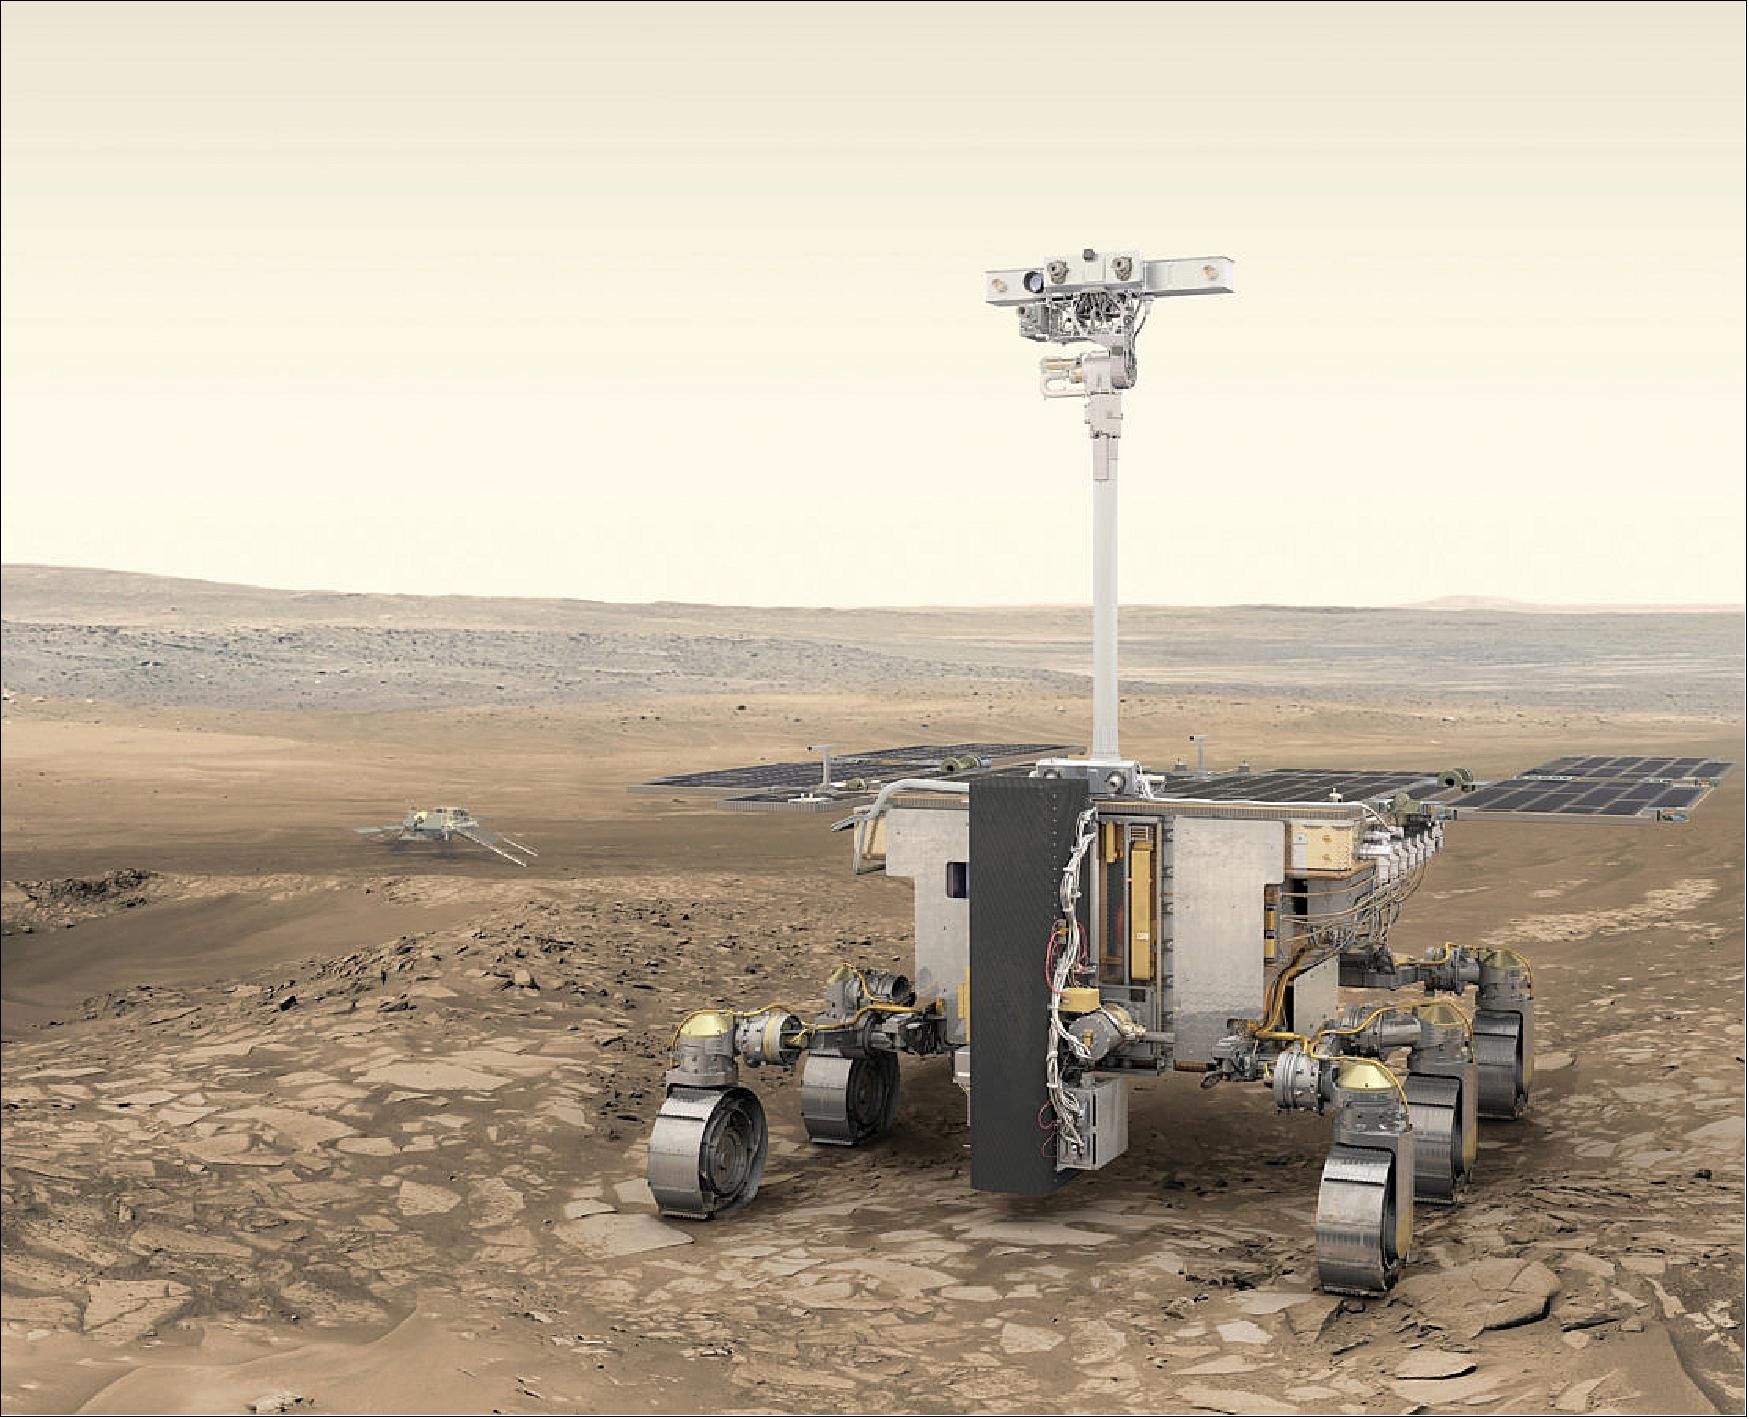 Figure 106: ESA’s ExoMars rover (foreground) and Russia’s stationary surface science platform (background) are scheduled for launch in July 2020, arriving at Mars in March 2021. The Trace Gas Orbiter, which has been at Mars since October 2016, will act as a relay station for the mission, as well as conducting its own science mission (image credit: ESA/ATG medialab)